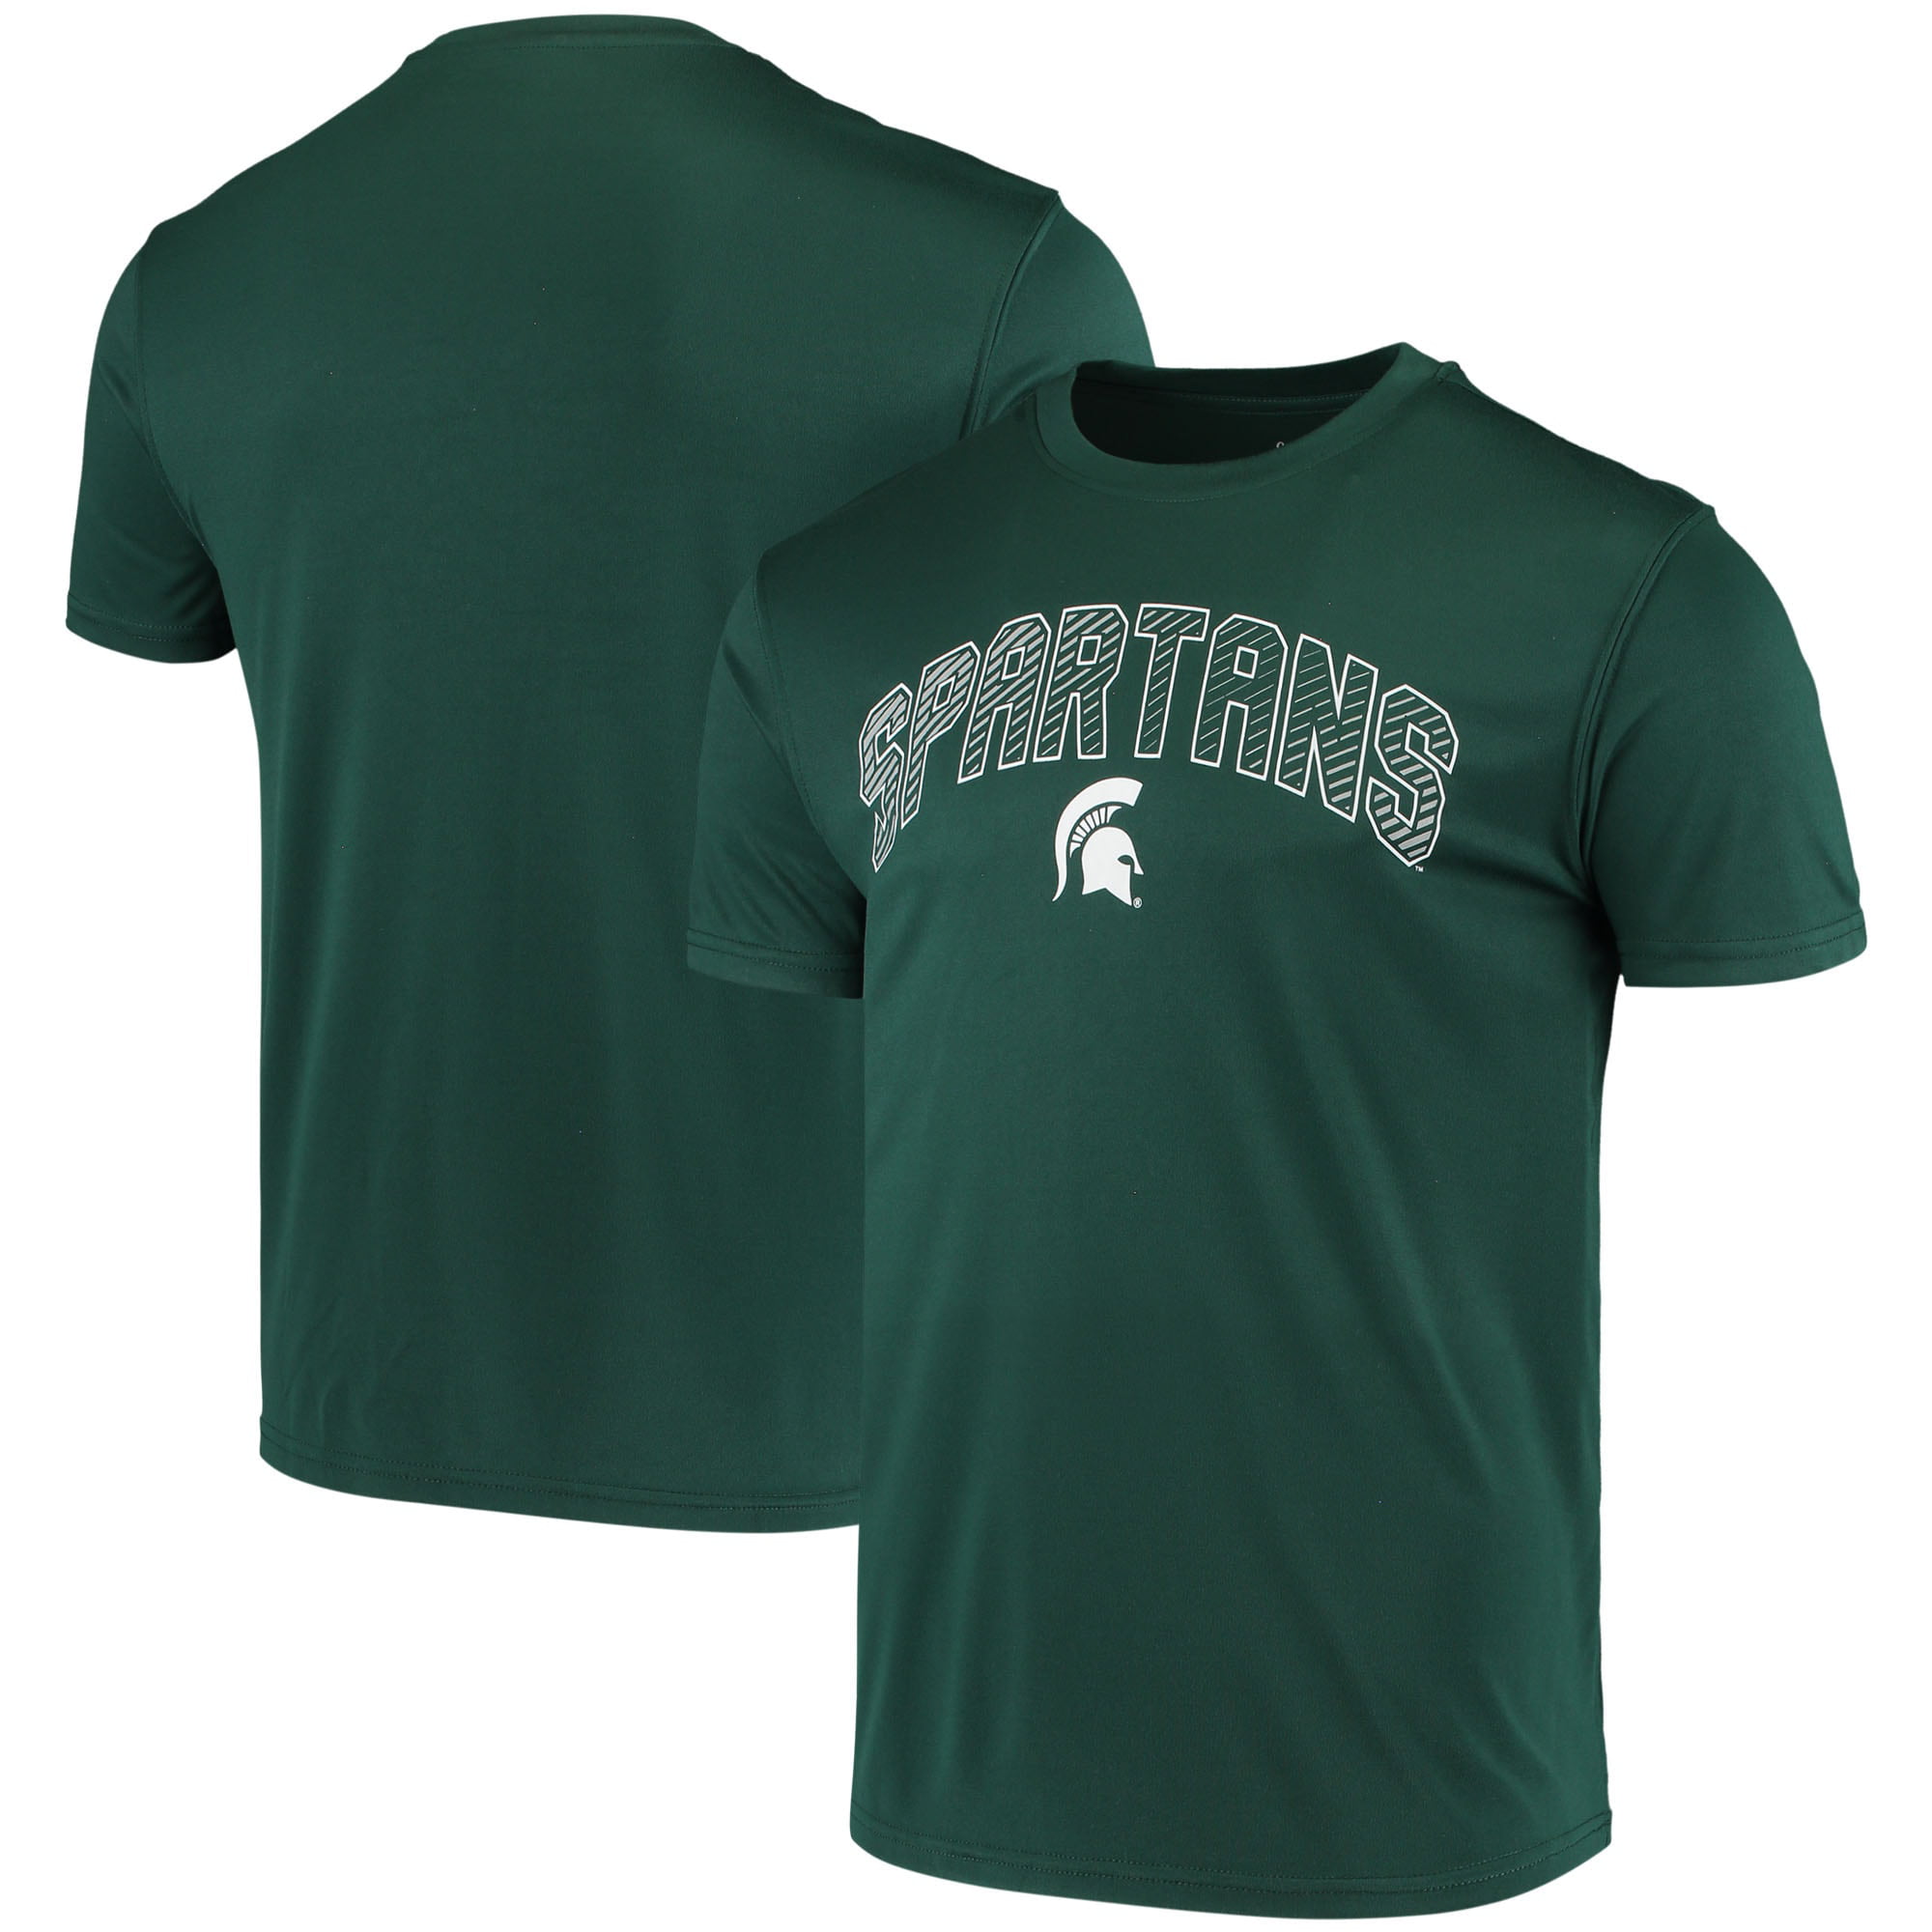 Captivating Apparel - Michigan State Spartans Catalyst T-Shirt - Green ...